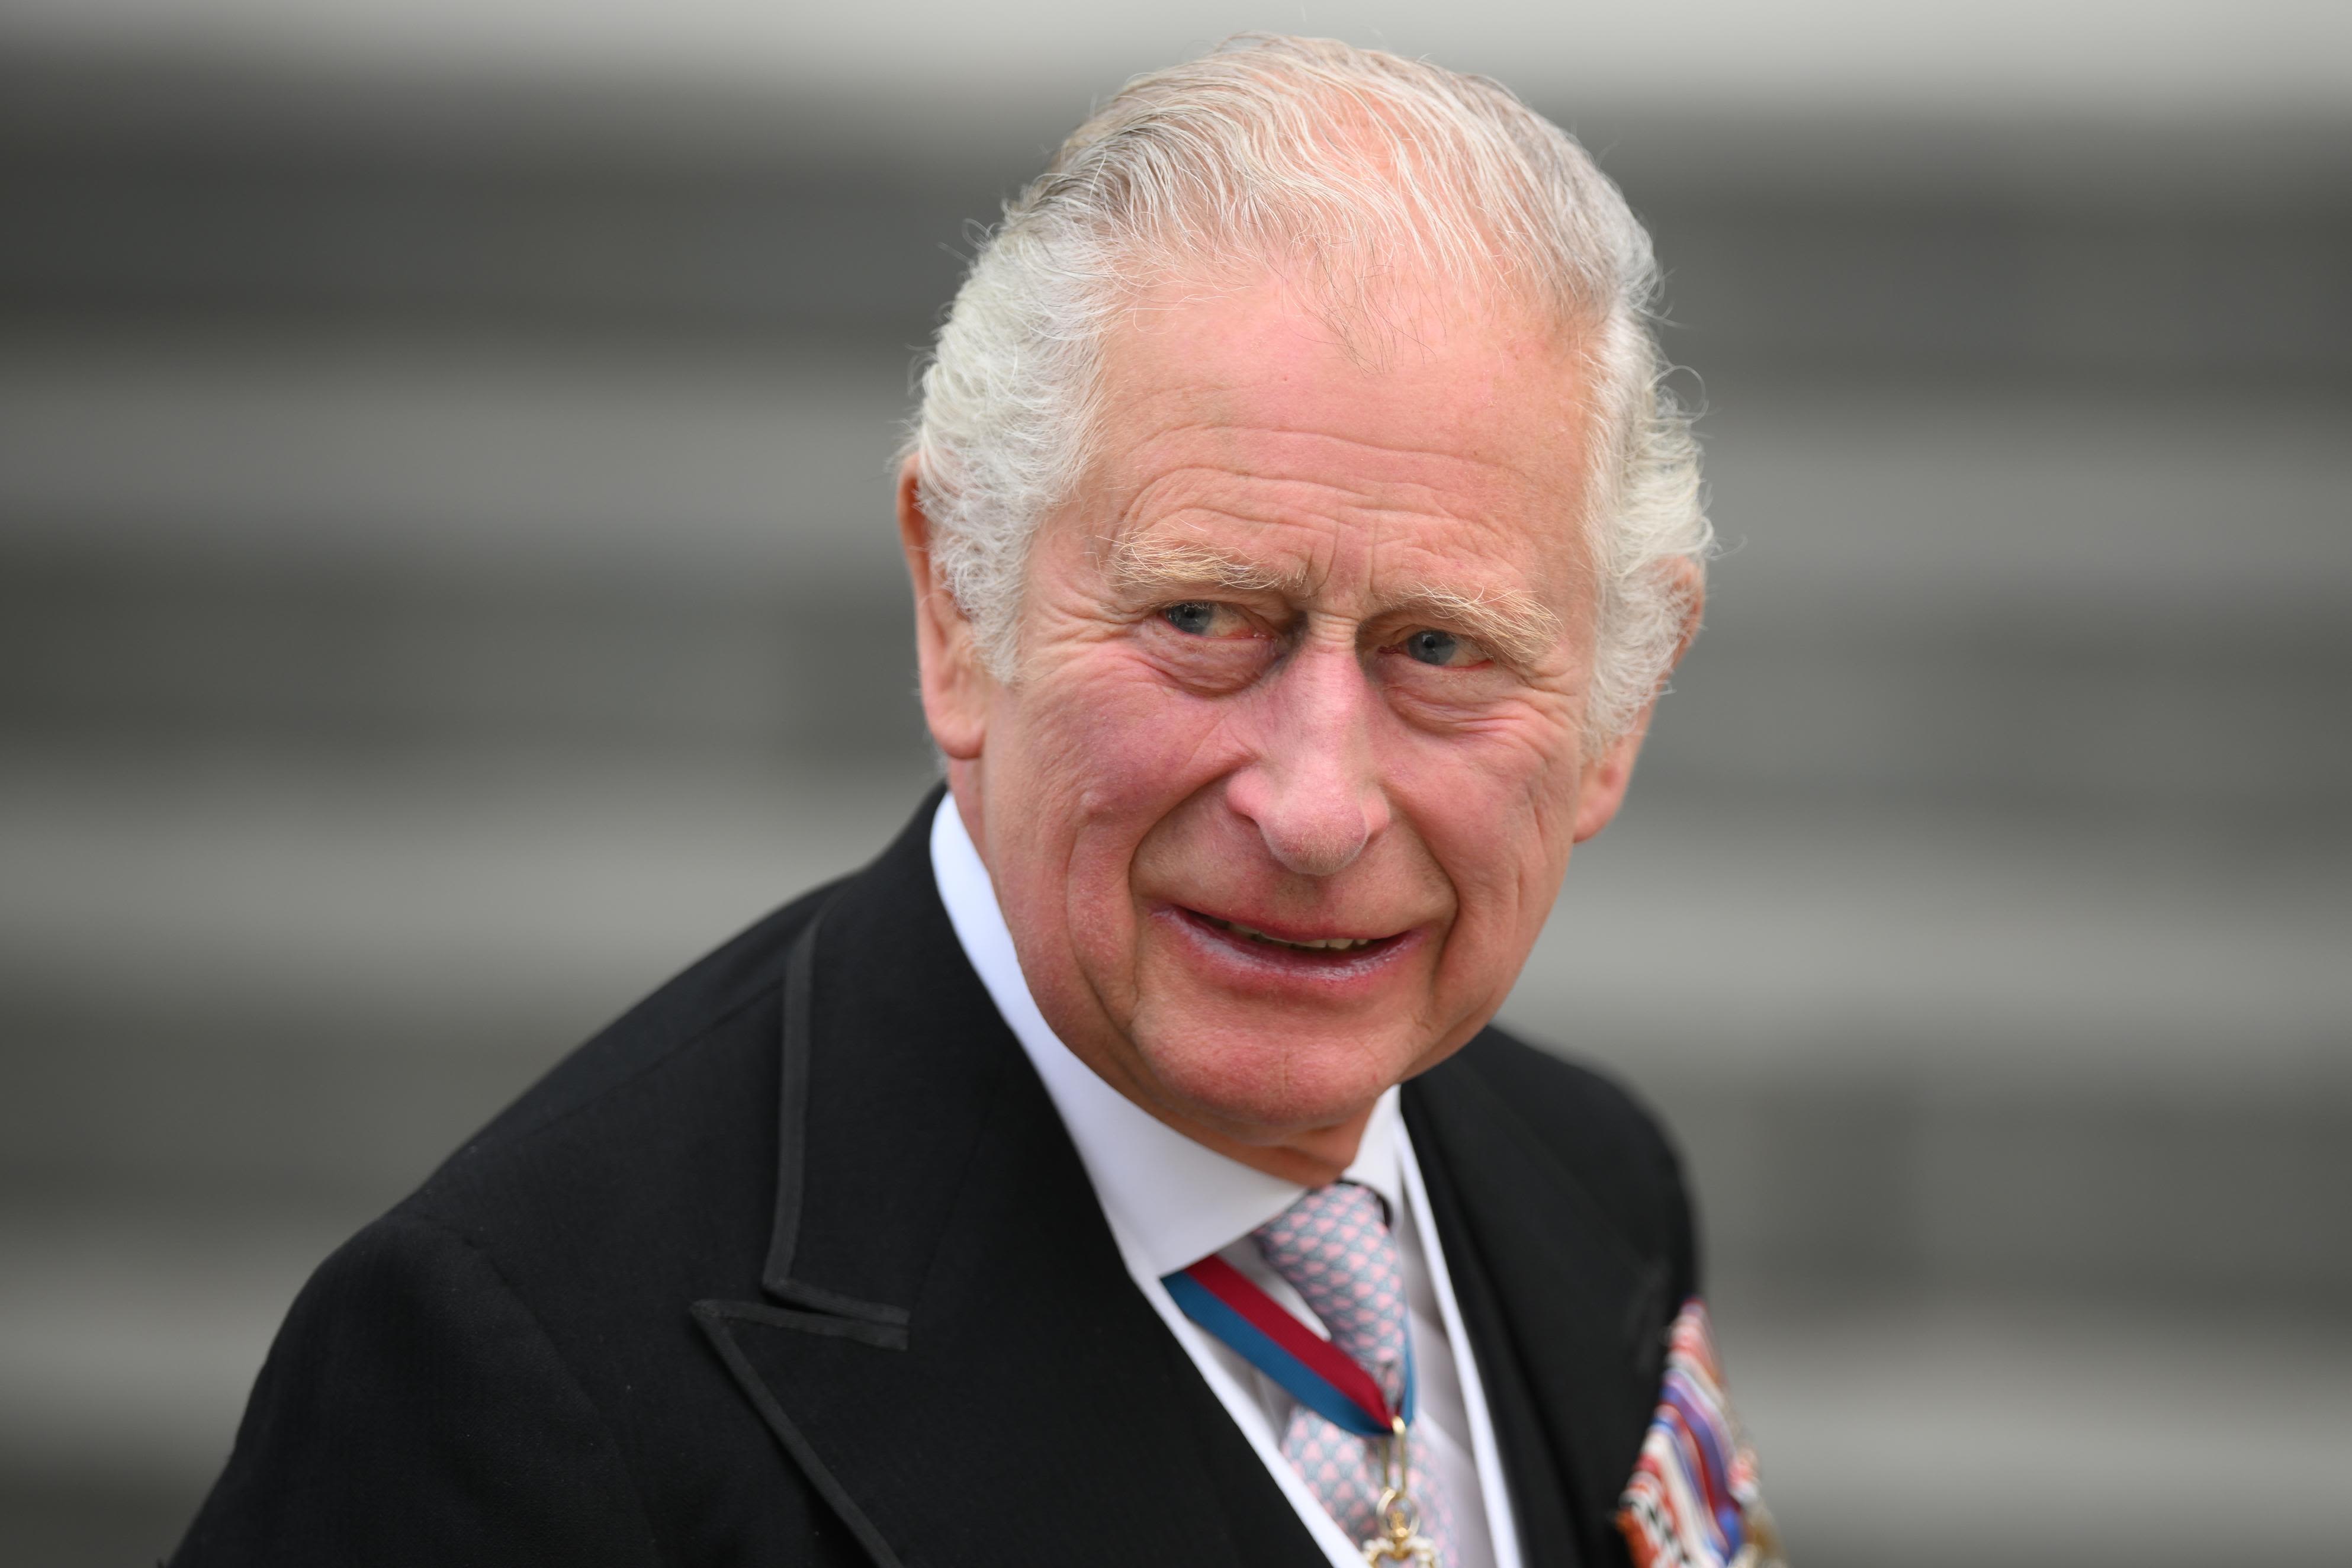 Queen Elizabeth II: why Charles is already king and other key  constitutional questions answered